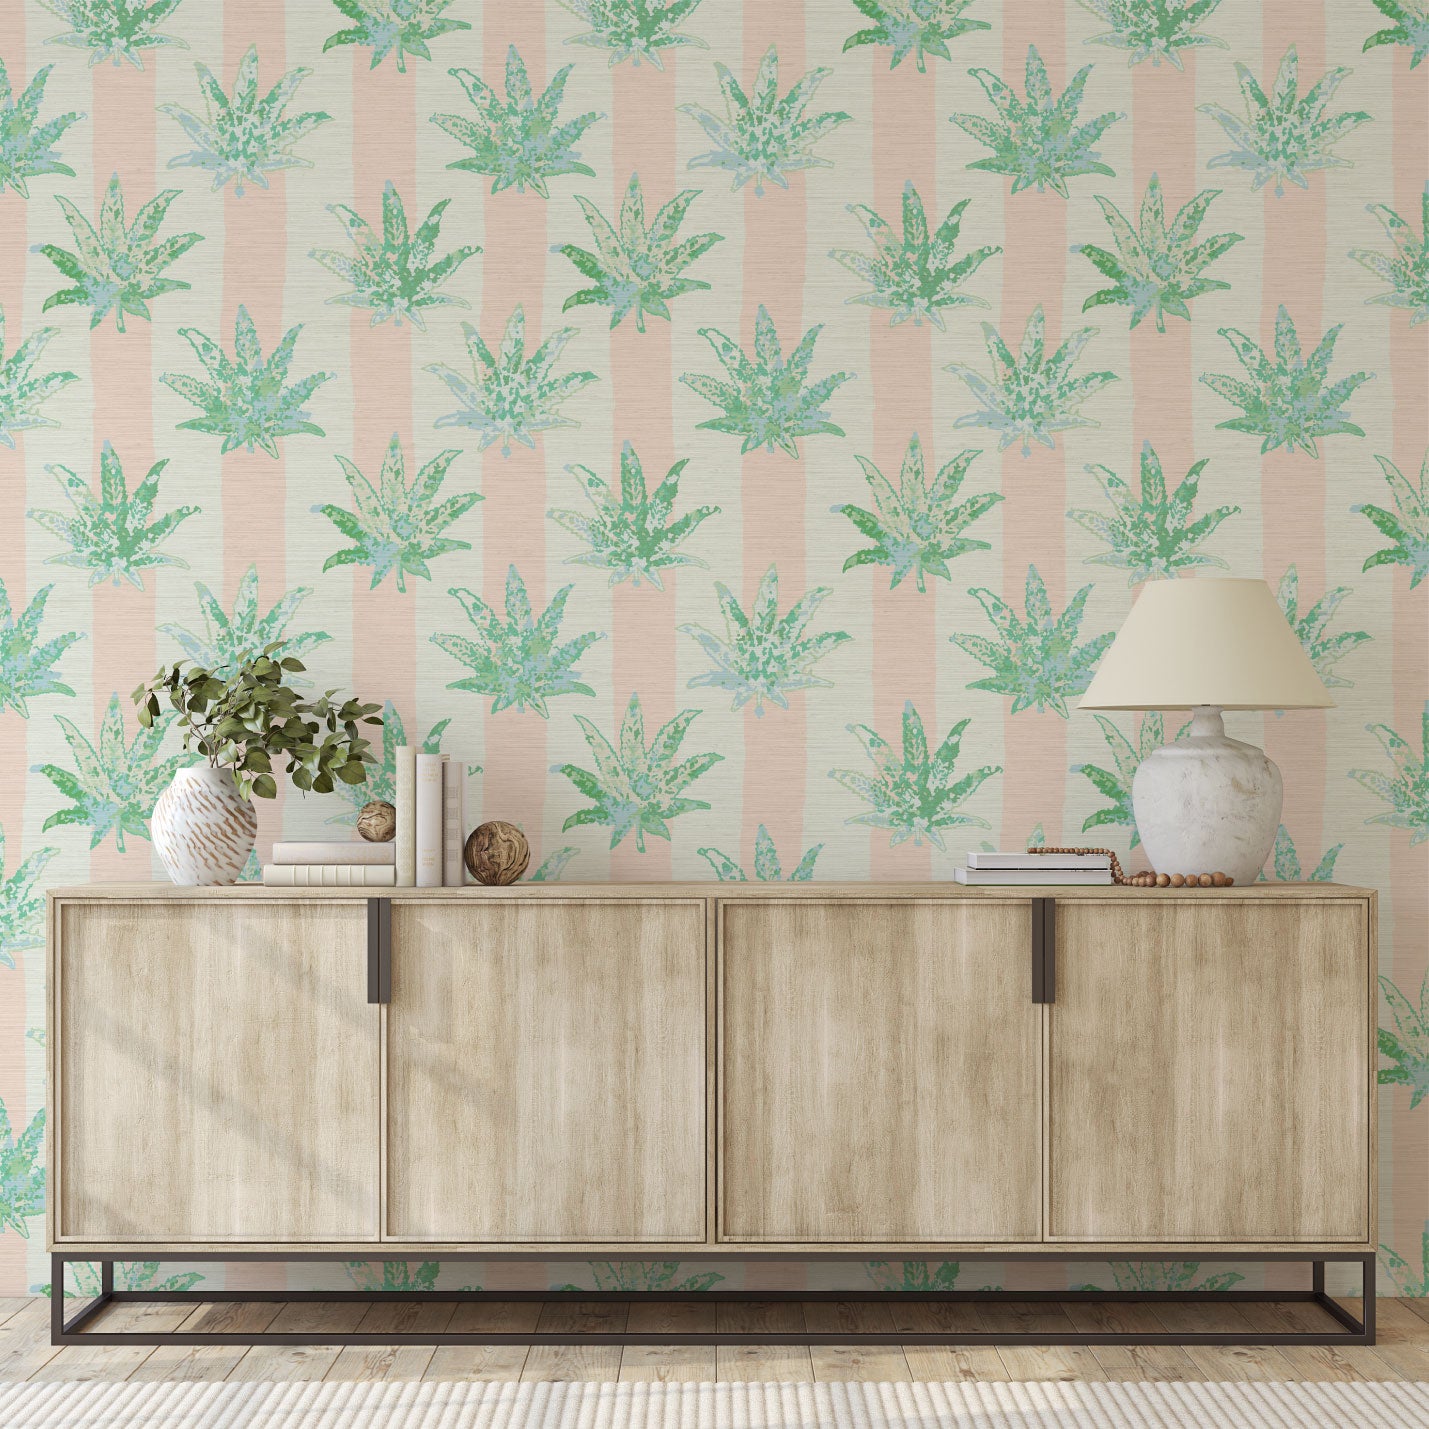 printed textured natural grasscloth wallpaper wall covering eco-friendly sustainable wide vertical stripes painted pink light pink baby pink weed marijuana high-quality tailor-made custom designed interior design bold vacation seaside coastal waterfront retreat relaxed beach cottage entrance